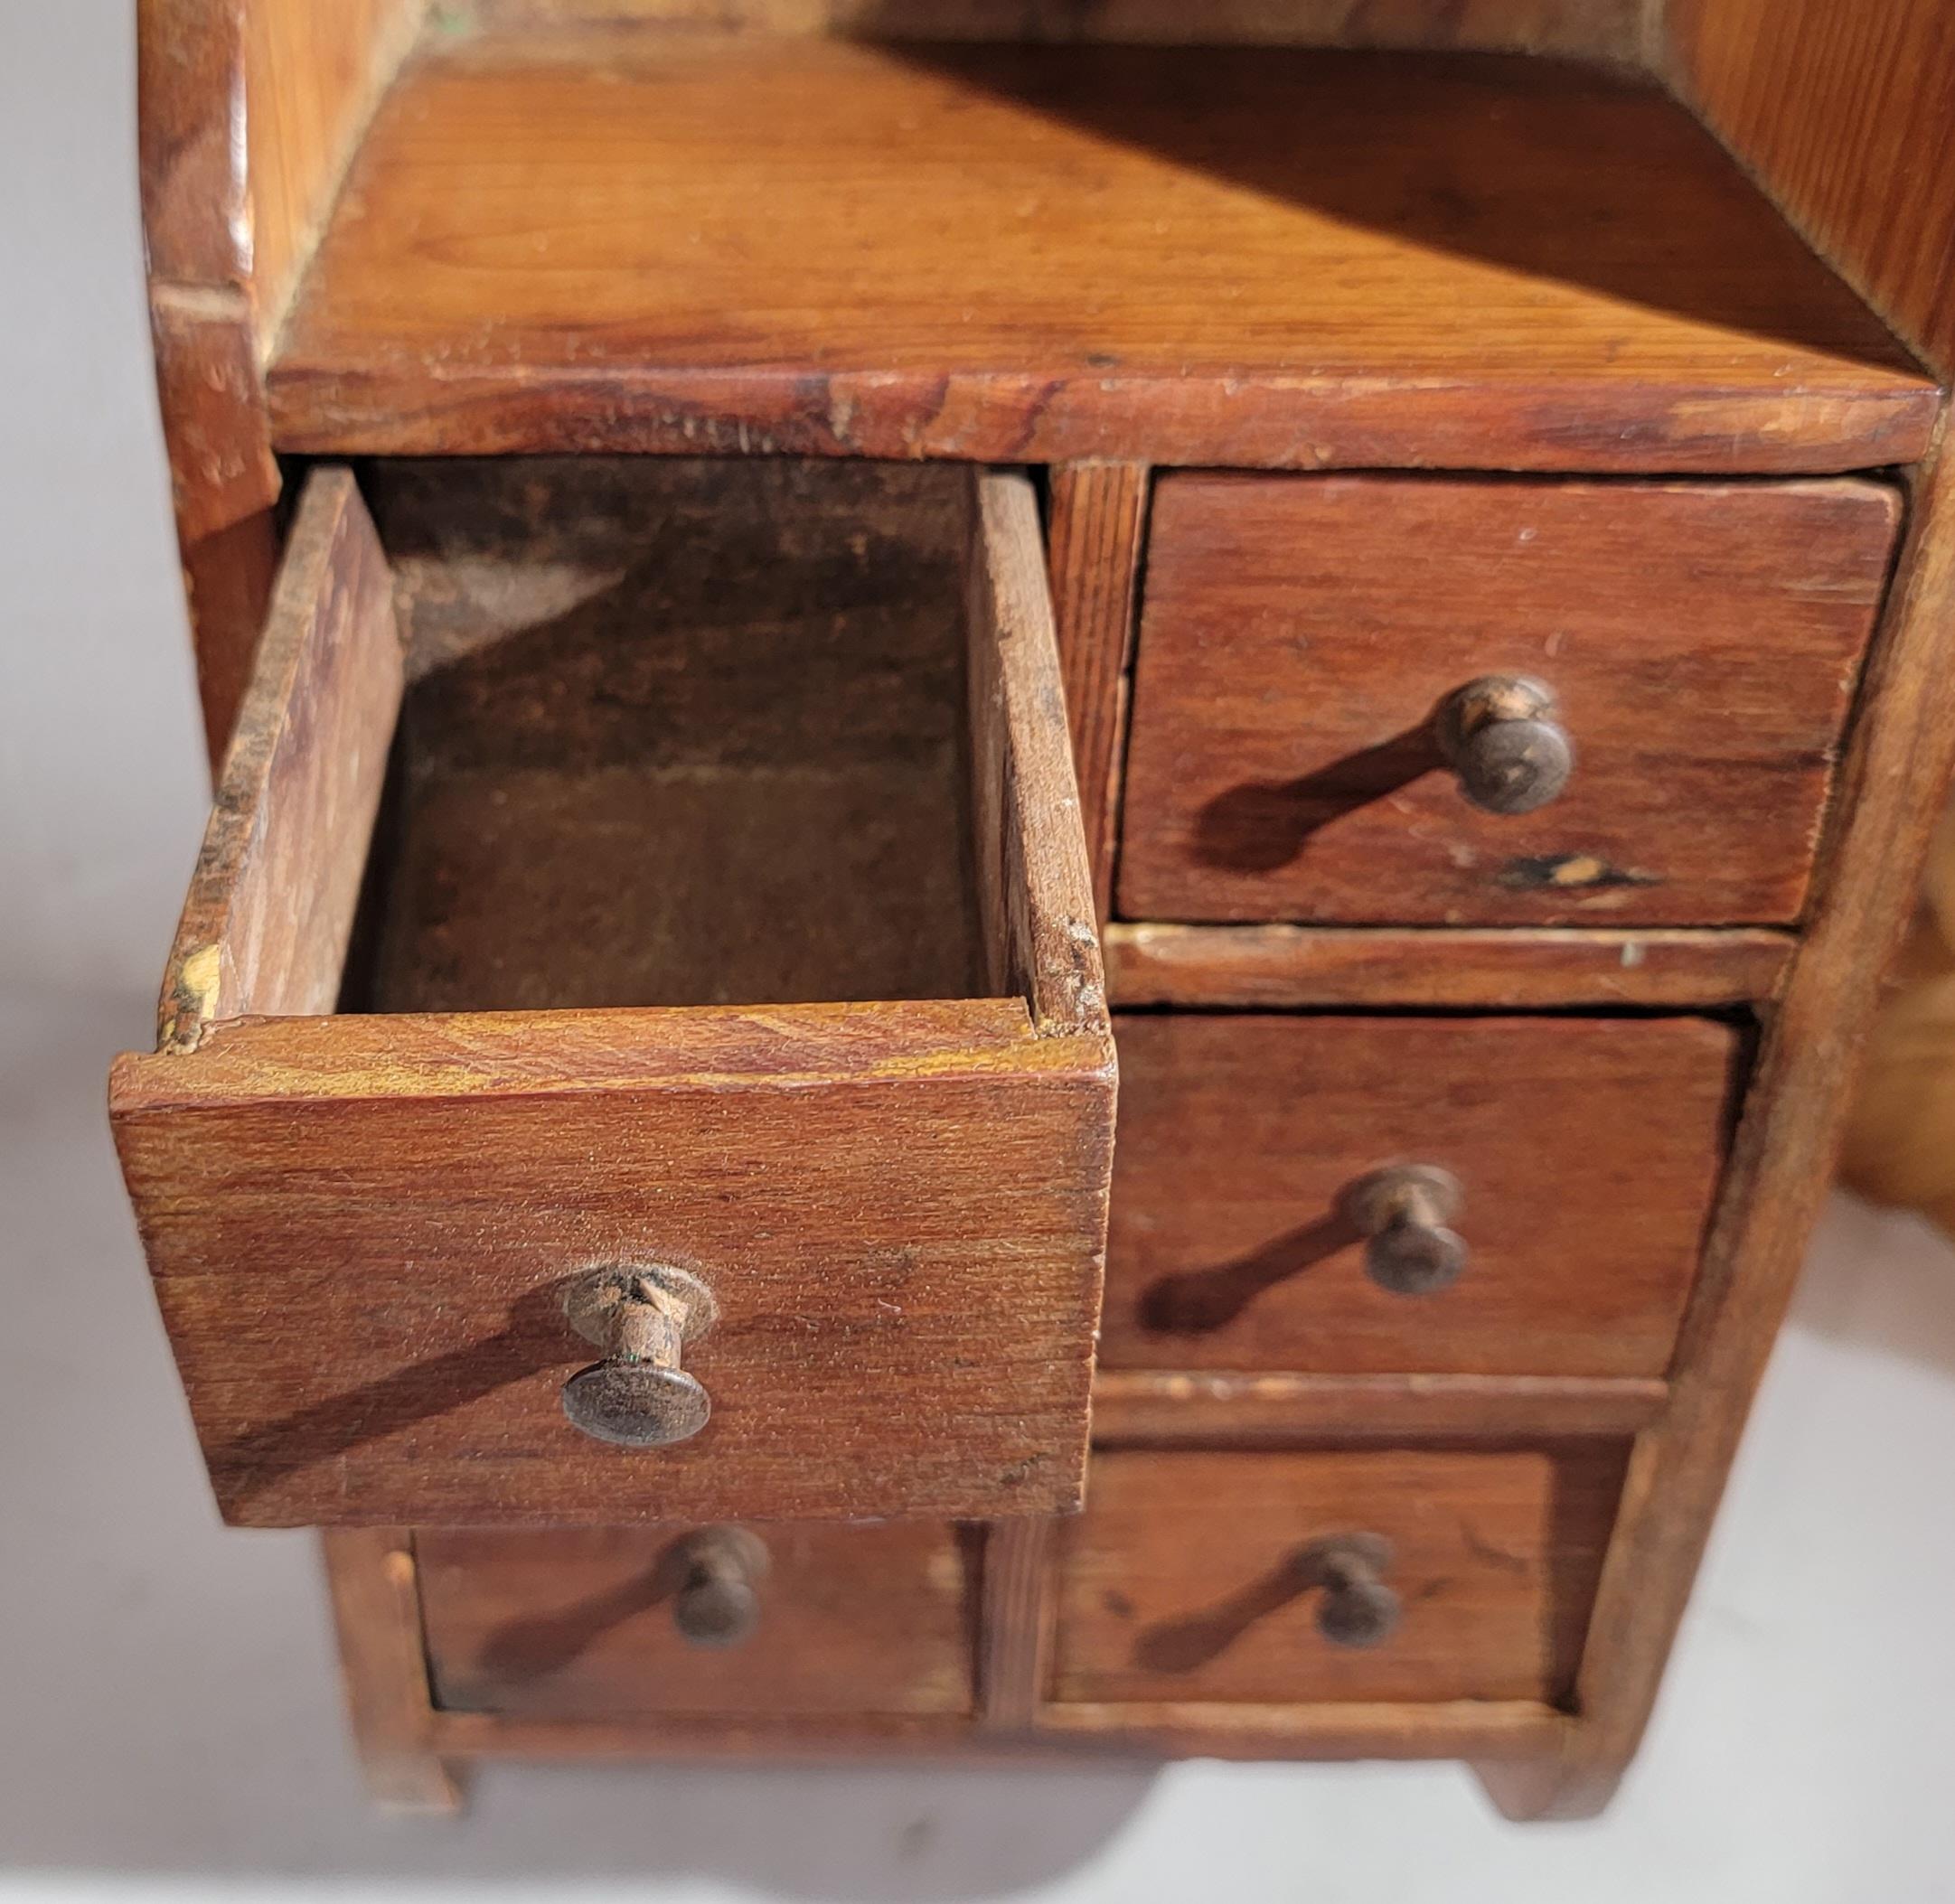 19th century Hanging wall spice box with handmade drawers and tiny drawer pulls and in fine condition.This spice box has a nice mello patina.